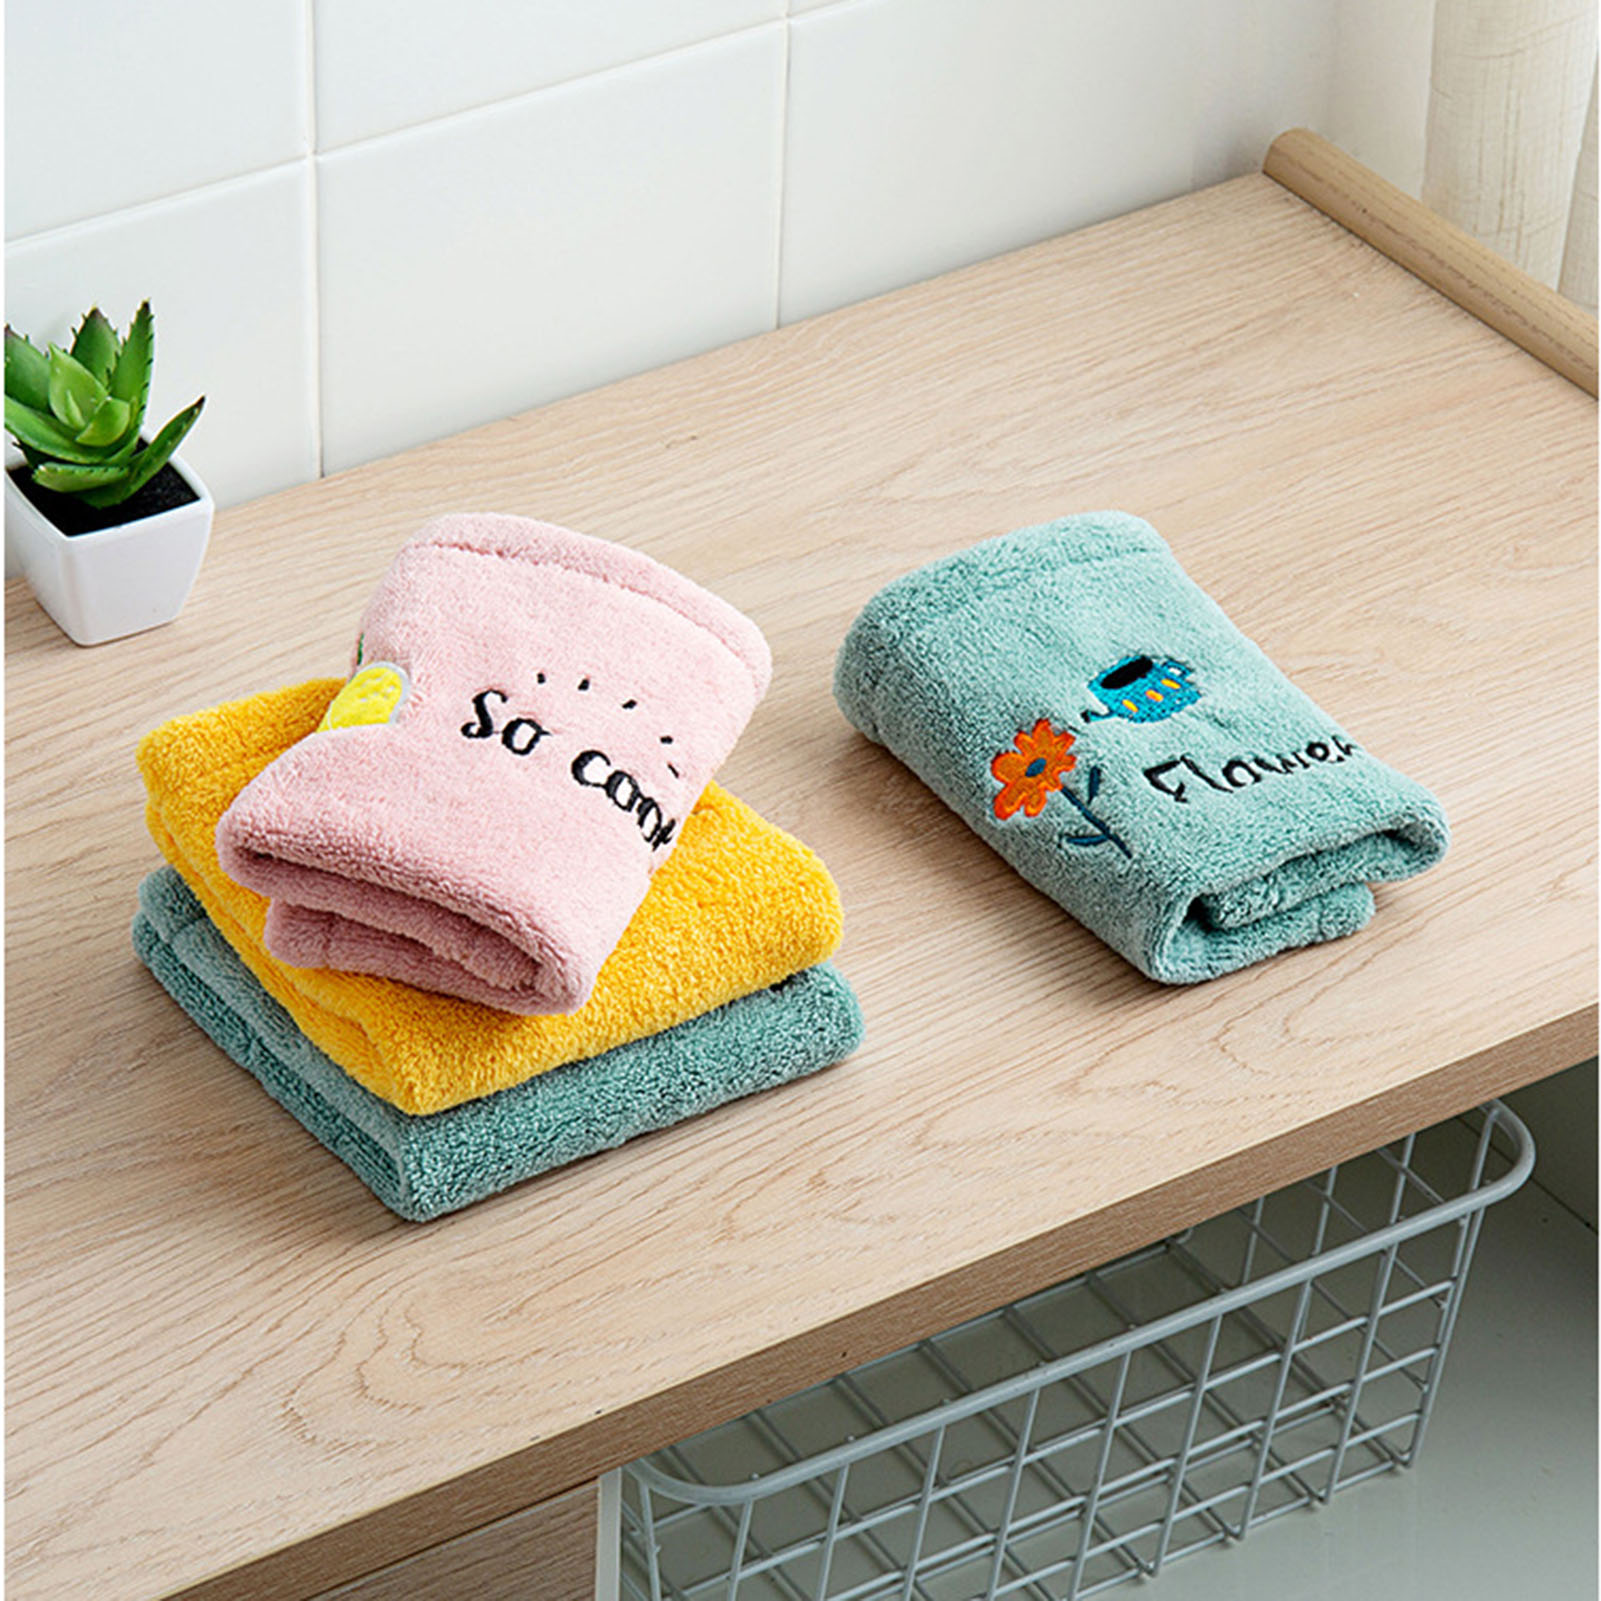 SPRING PARK Bathroom Hand Towels , Cotton Face Towels , Soft Absorbent Hand Towel for Home - image 4 of 7